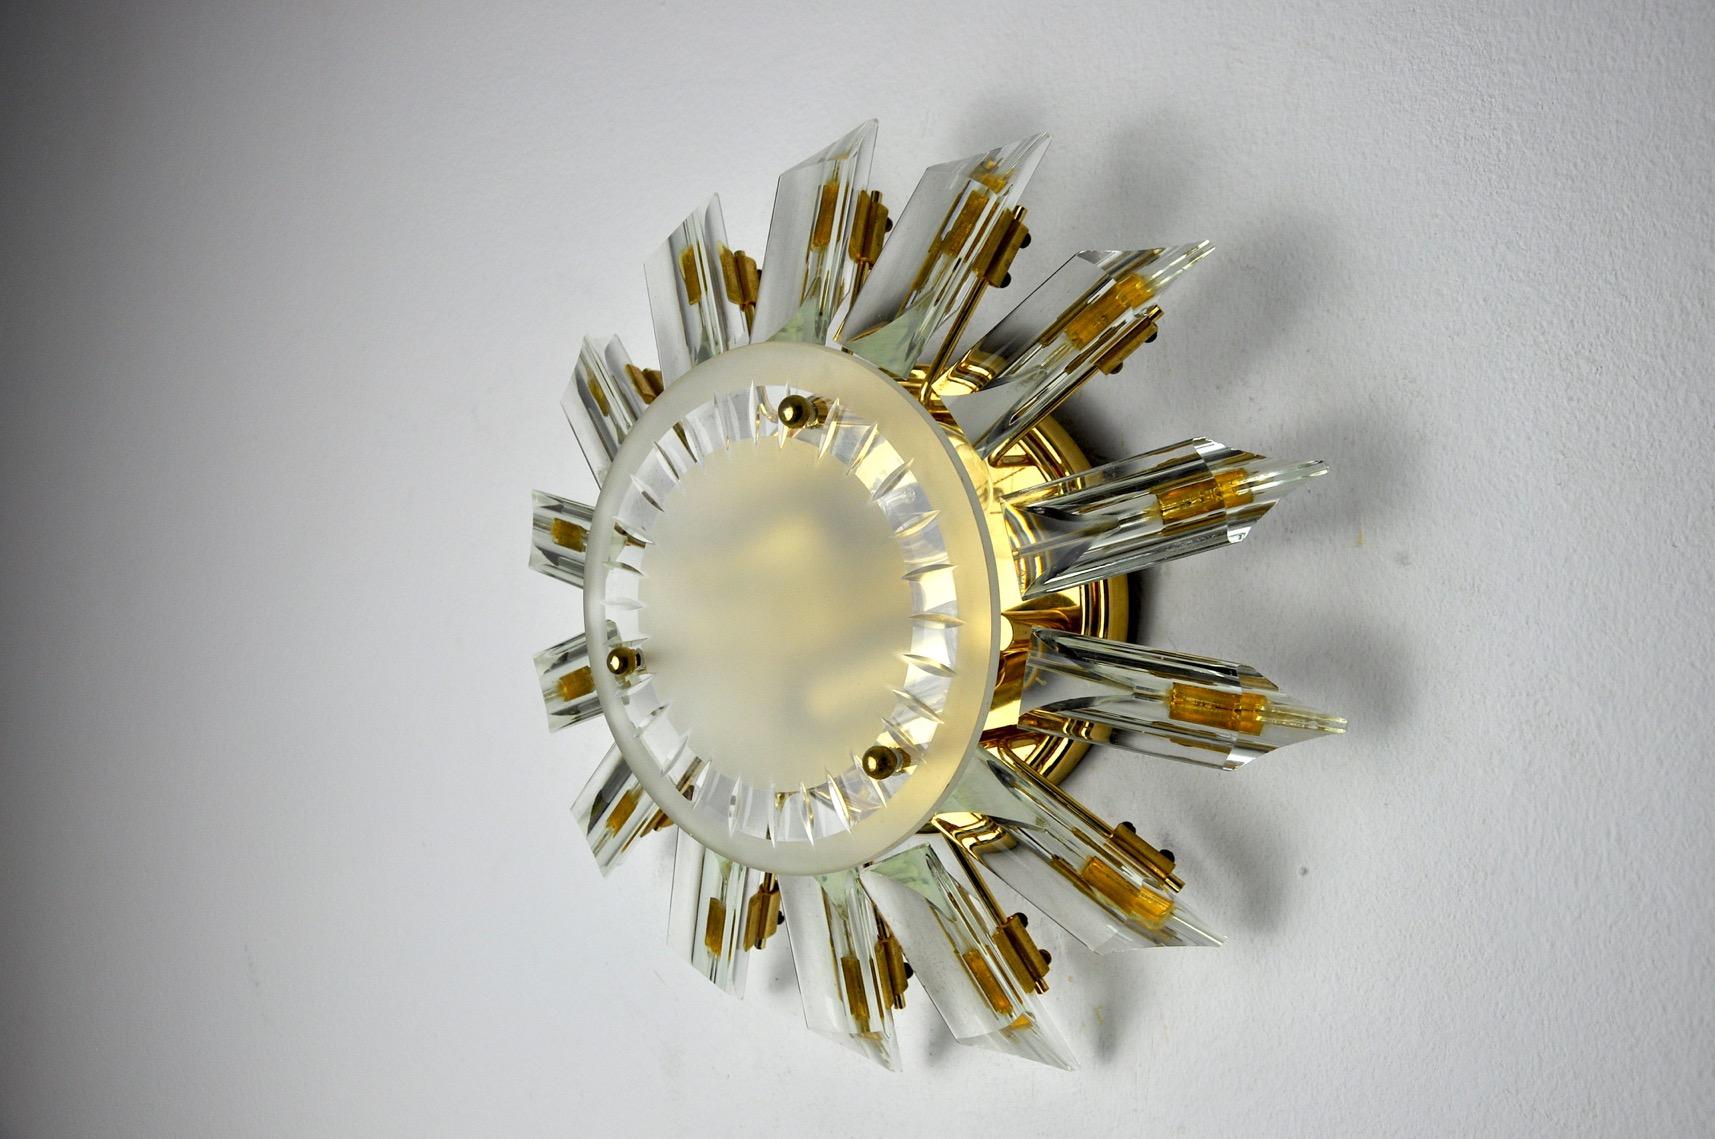 Superb and rare venini sun wall or ceiling lamp, designed and produced in Italy in the 1970s. This unique object is made of hoop-cut crystals. Object that will illuminate wonderfully and bring a real design touch to your interior. Electricity